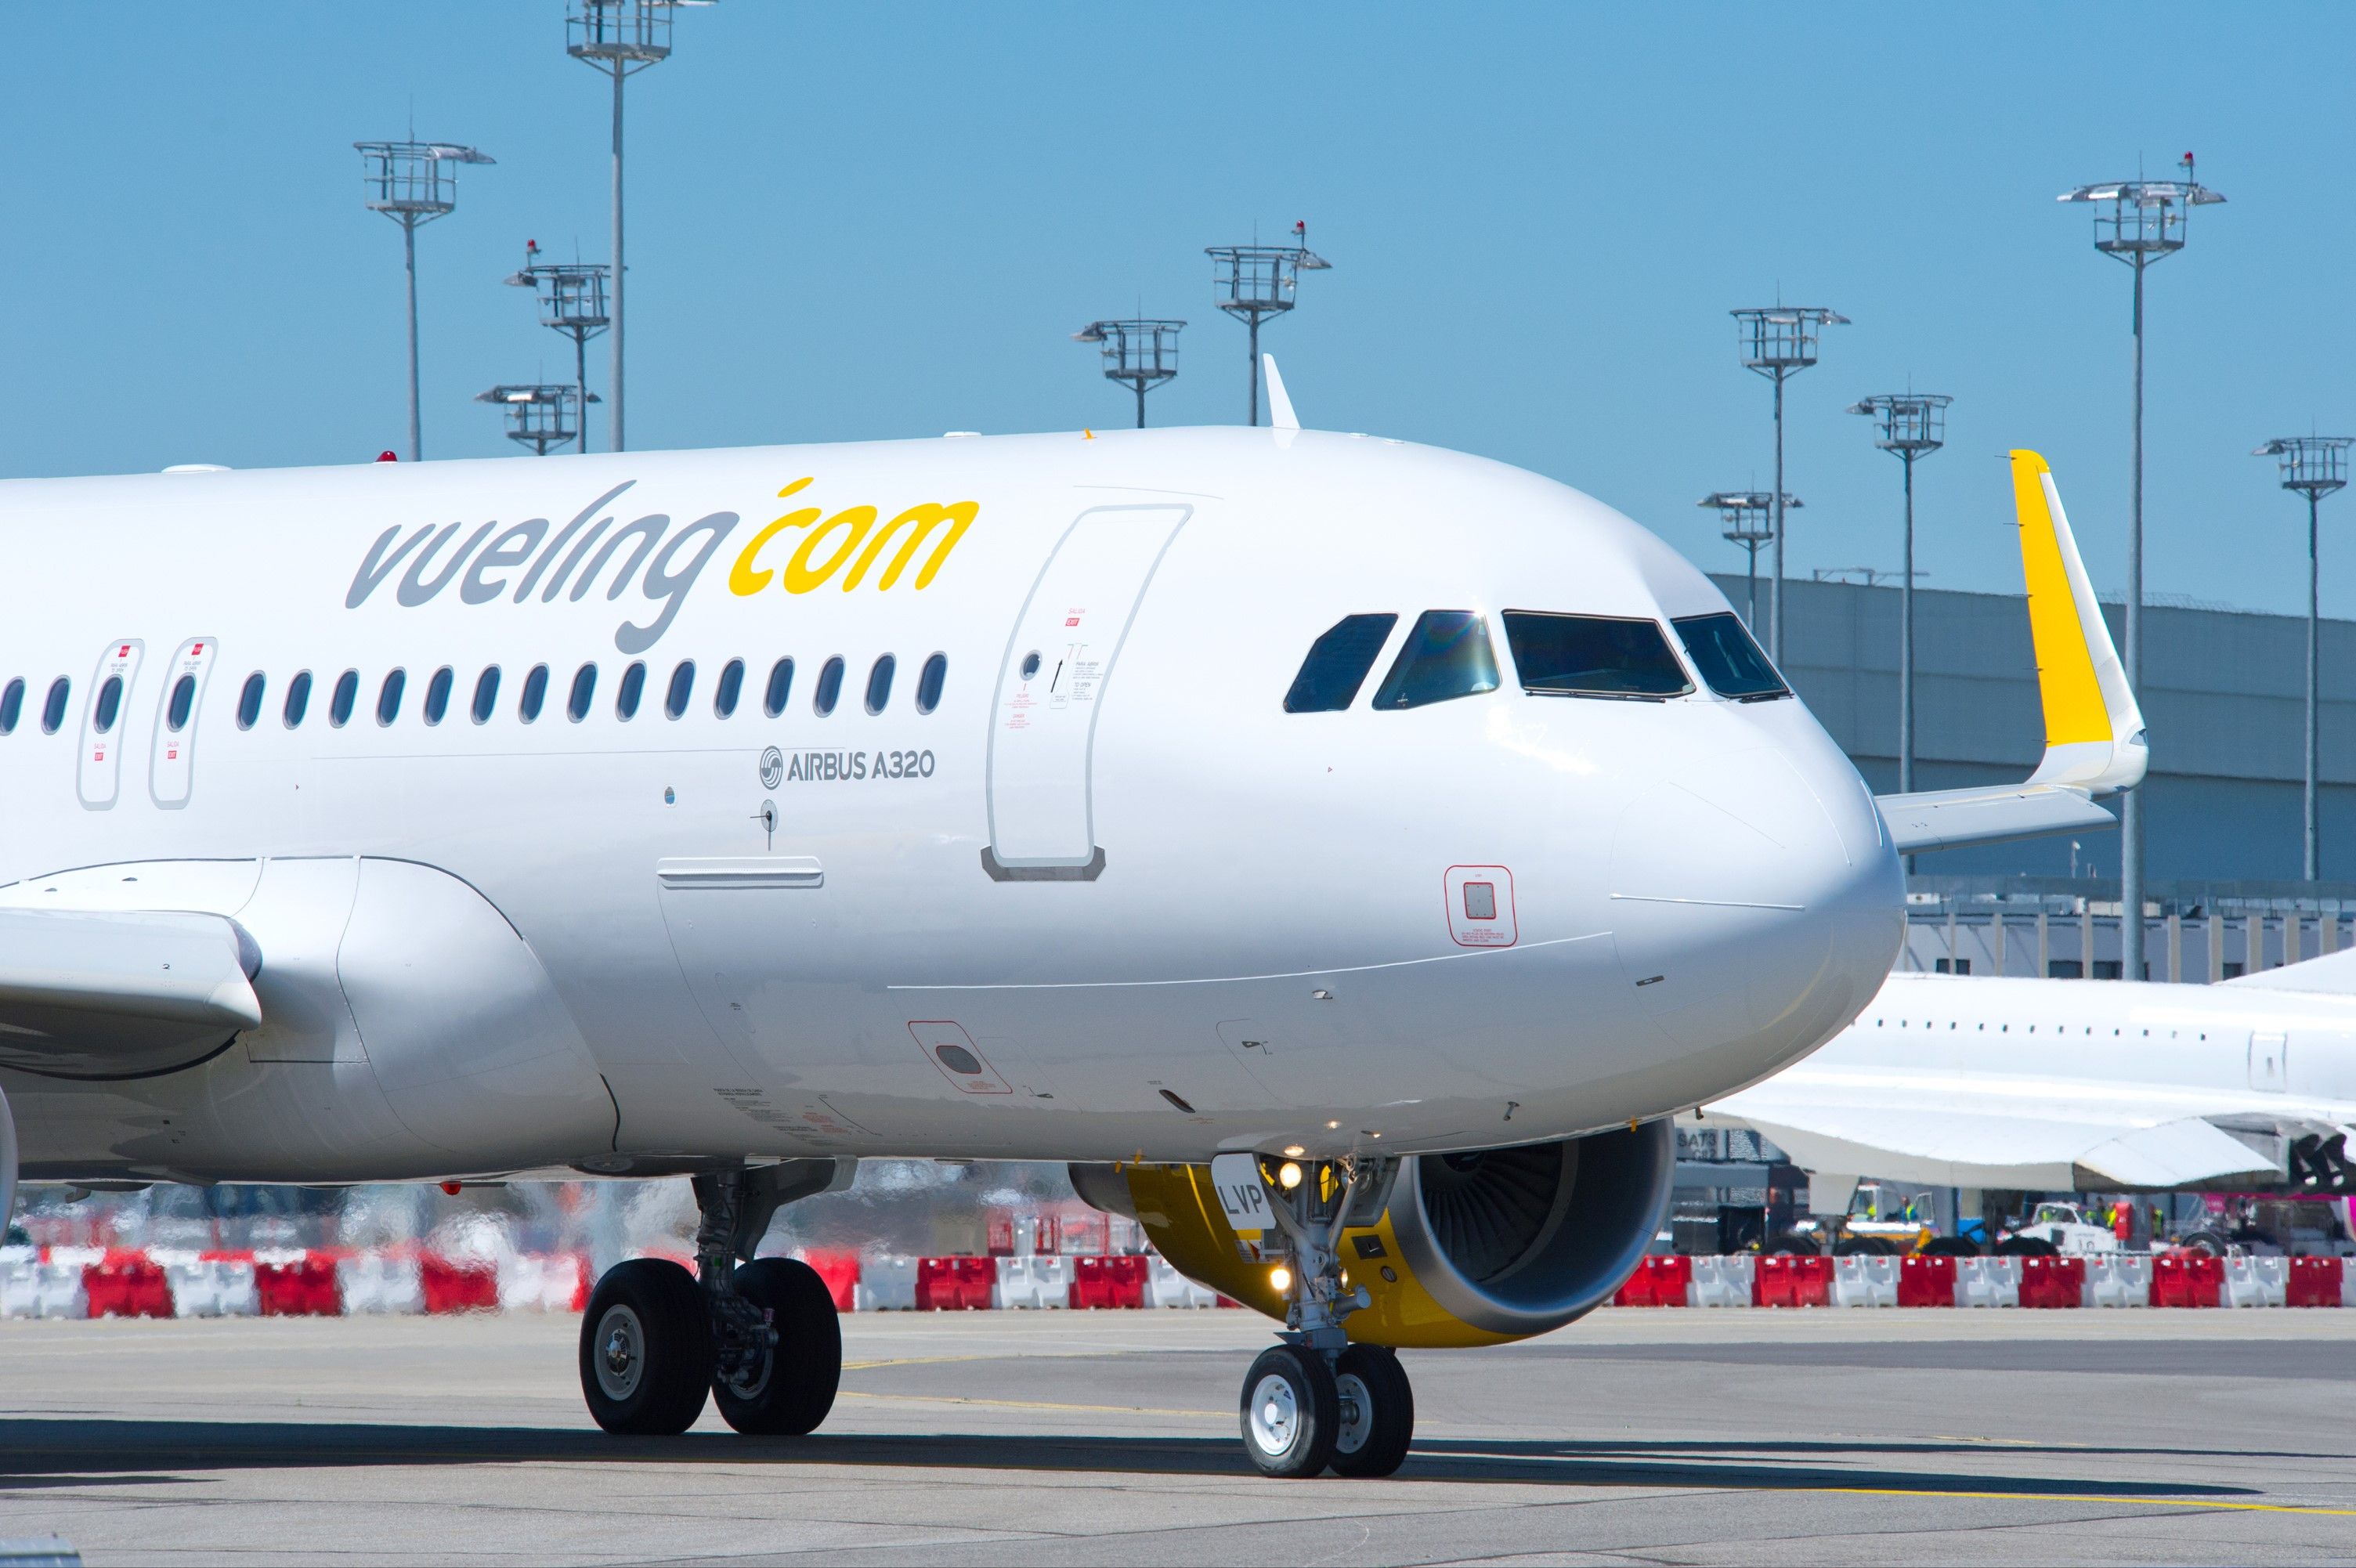 A Vueling Airbus A320 Taxiing to the runway.